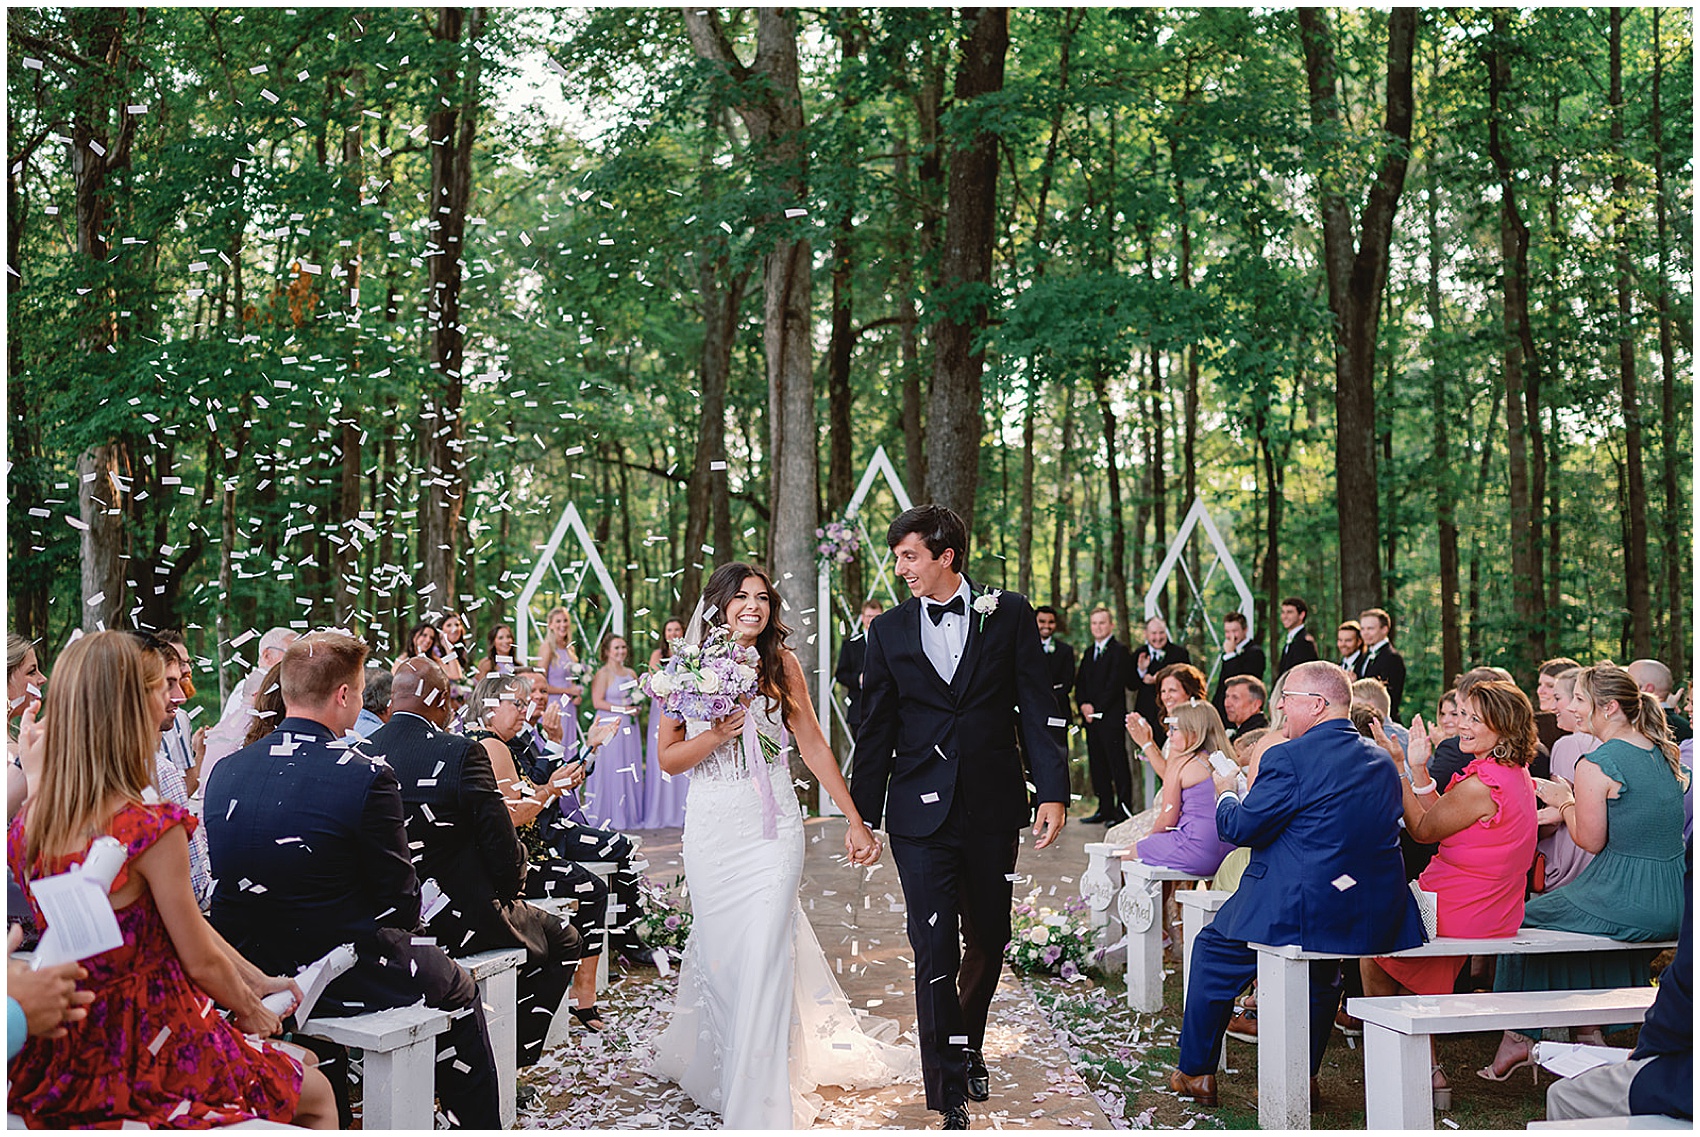 Newlyweds laugh and hold hands while walk up the aisle at their wedding reception in the woods